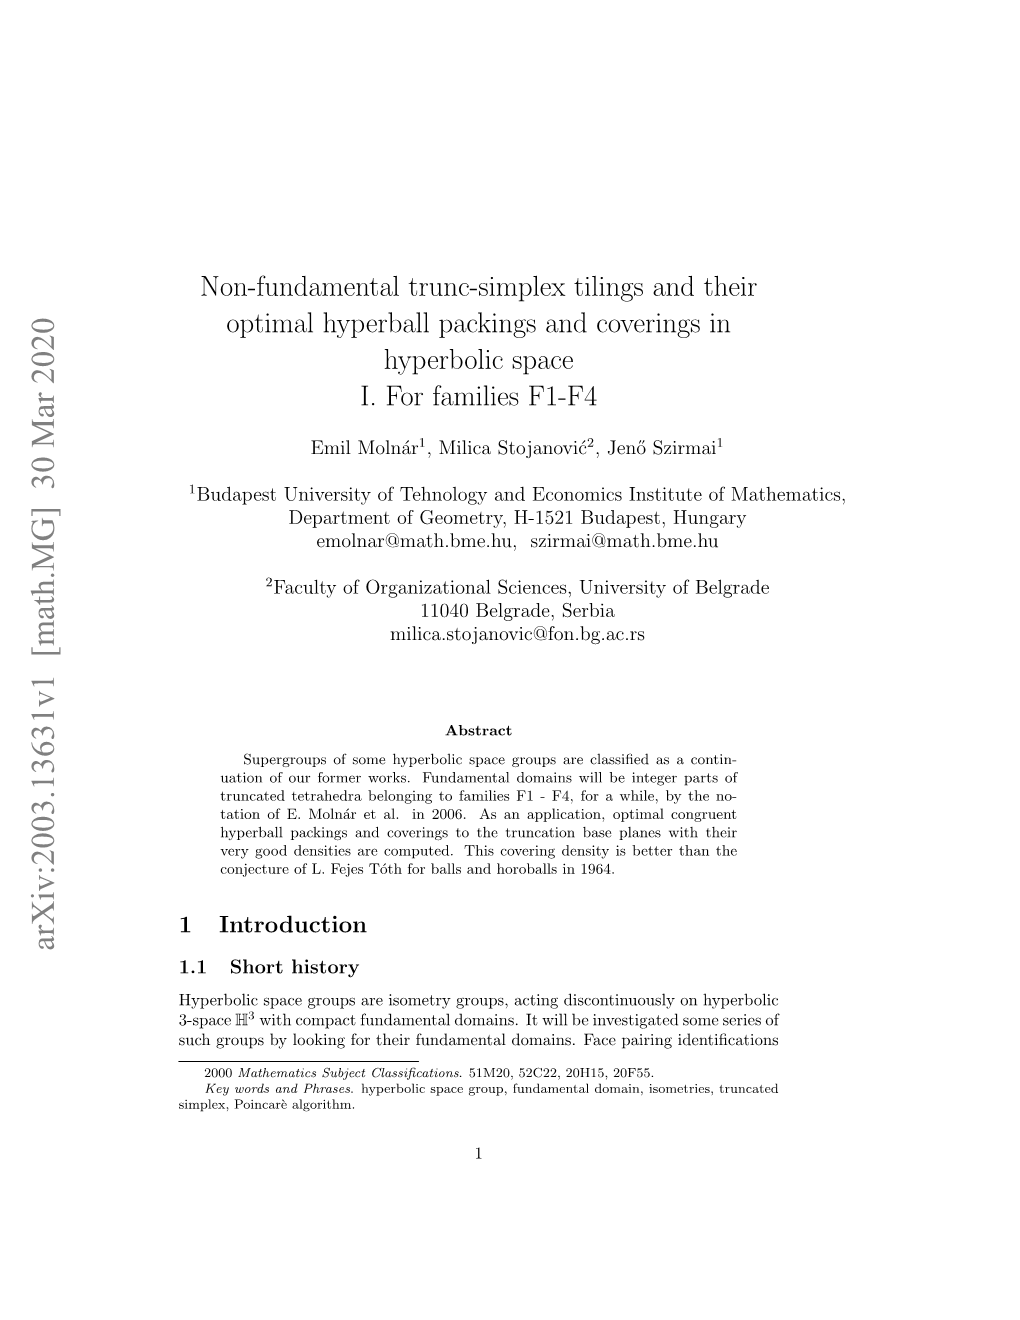 Non-Fundamental Trunc-Simplex Tilings and Their Optimal Hyperball Packings and Coverings in Hyperbolic Space I